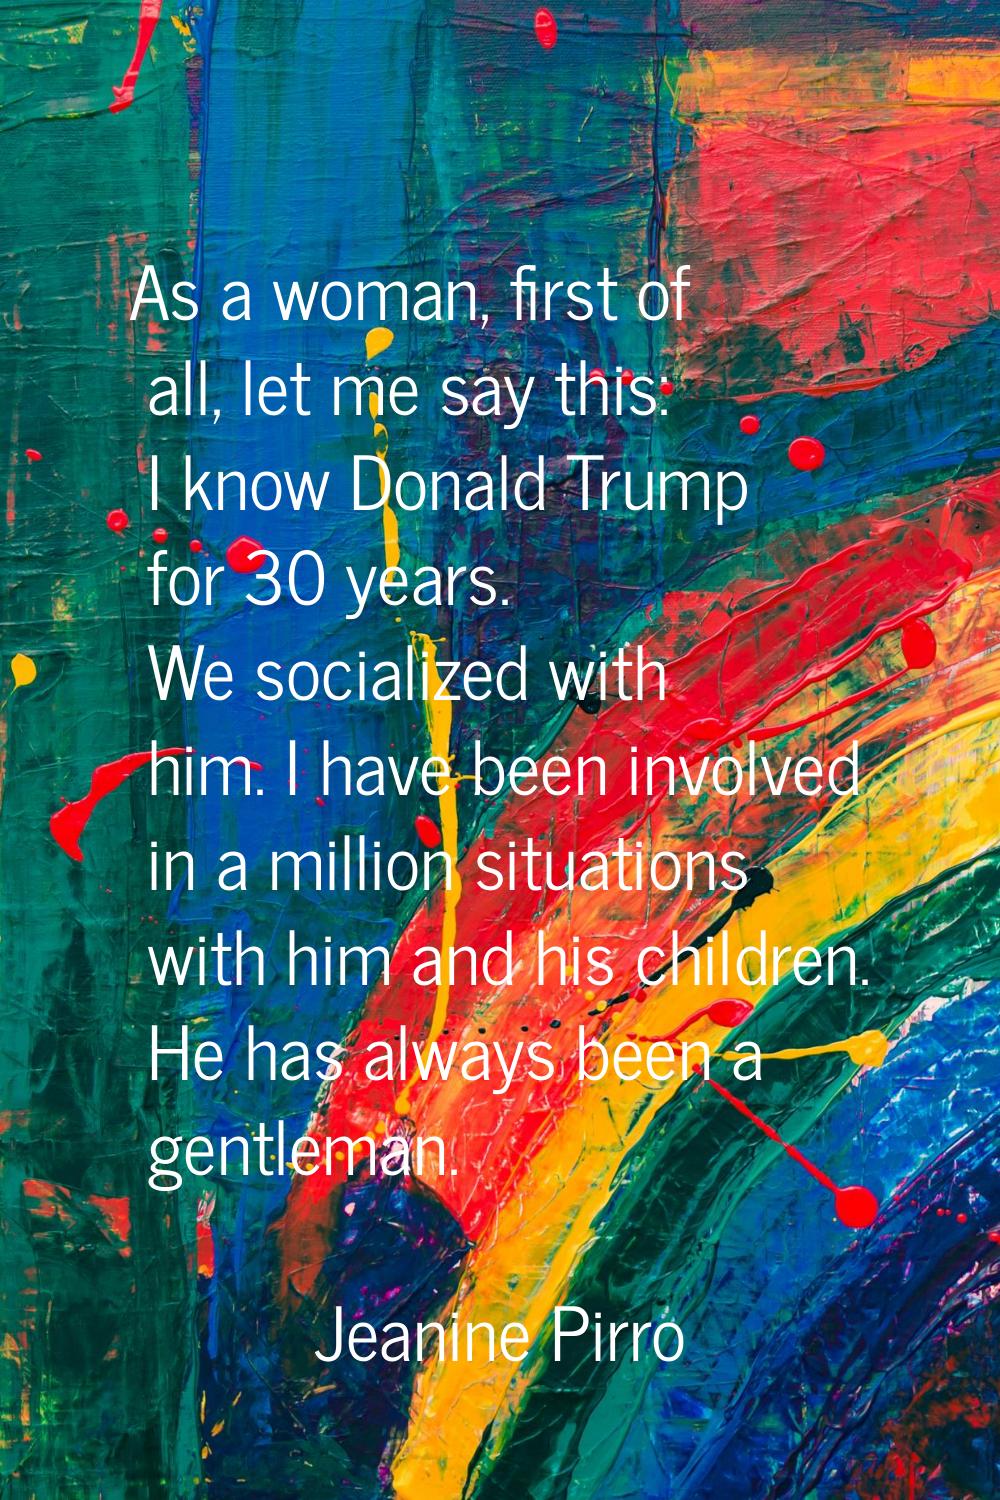 As a woman, first of all, let me say this: I know Donald Trump for 30 years. We socialized with him